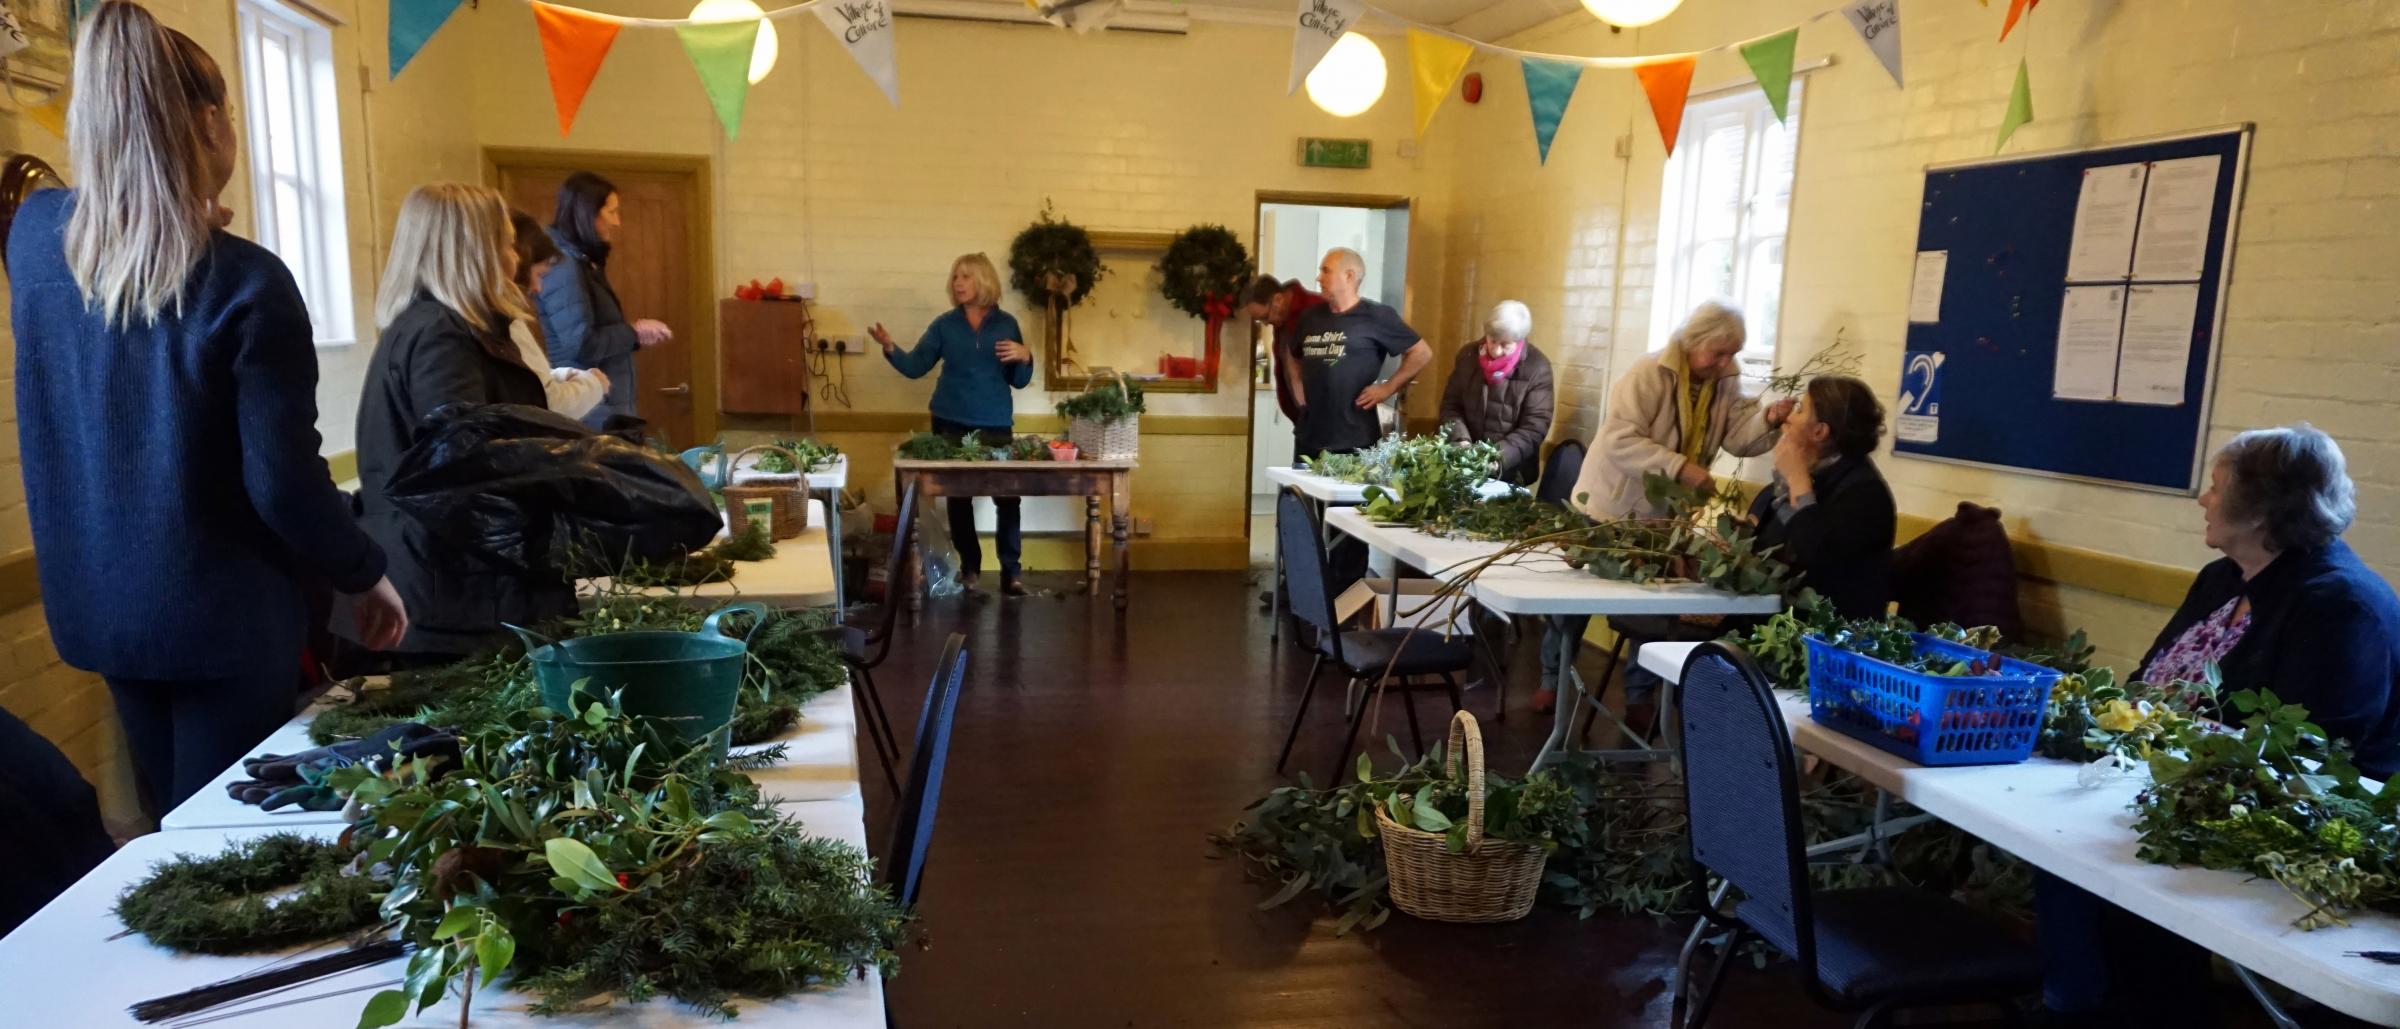 Wreath making: Crafts at Christmas